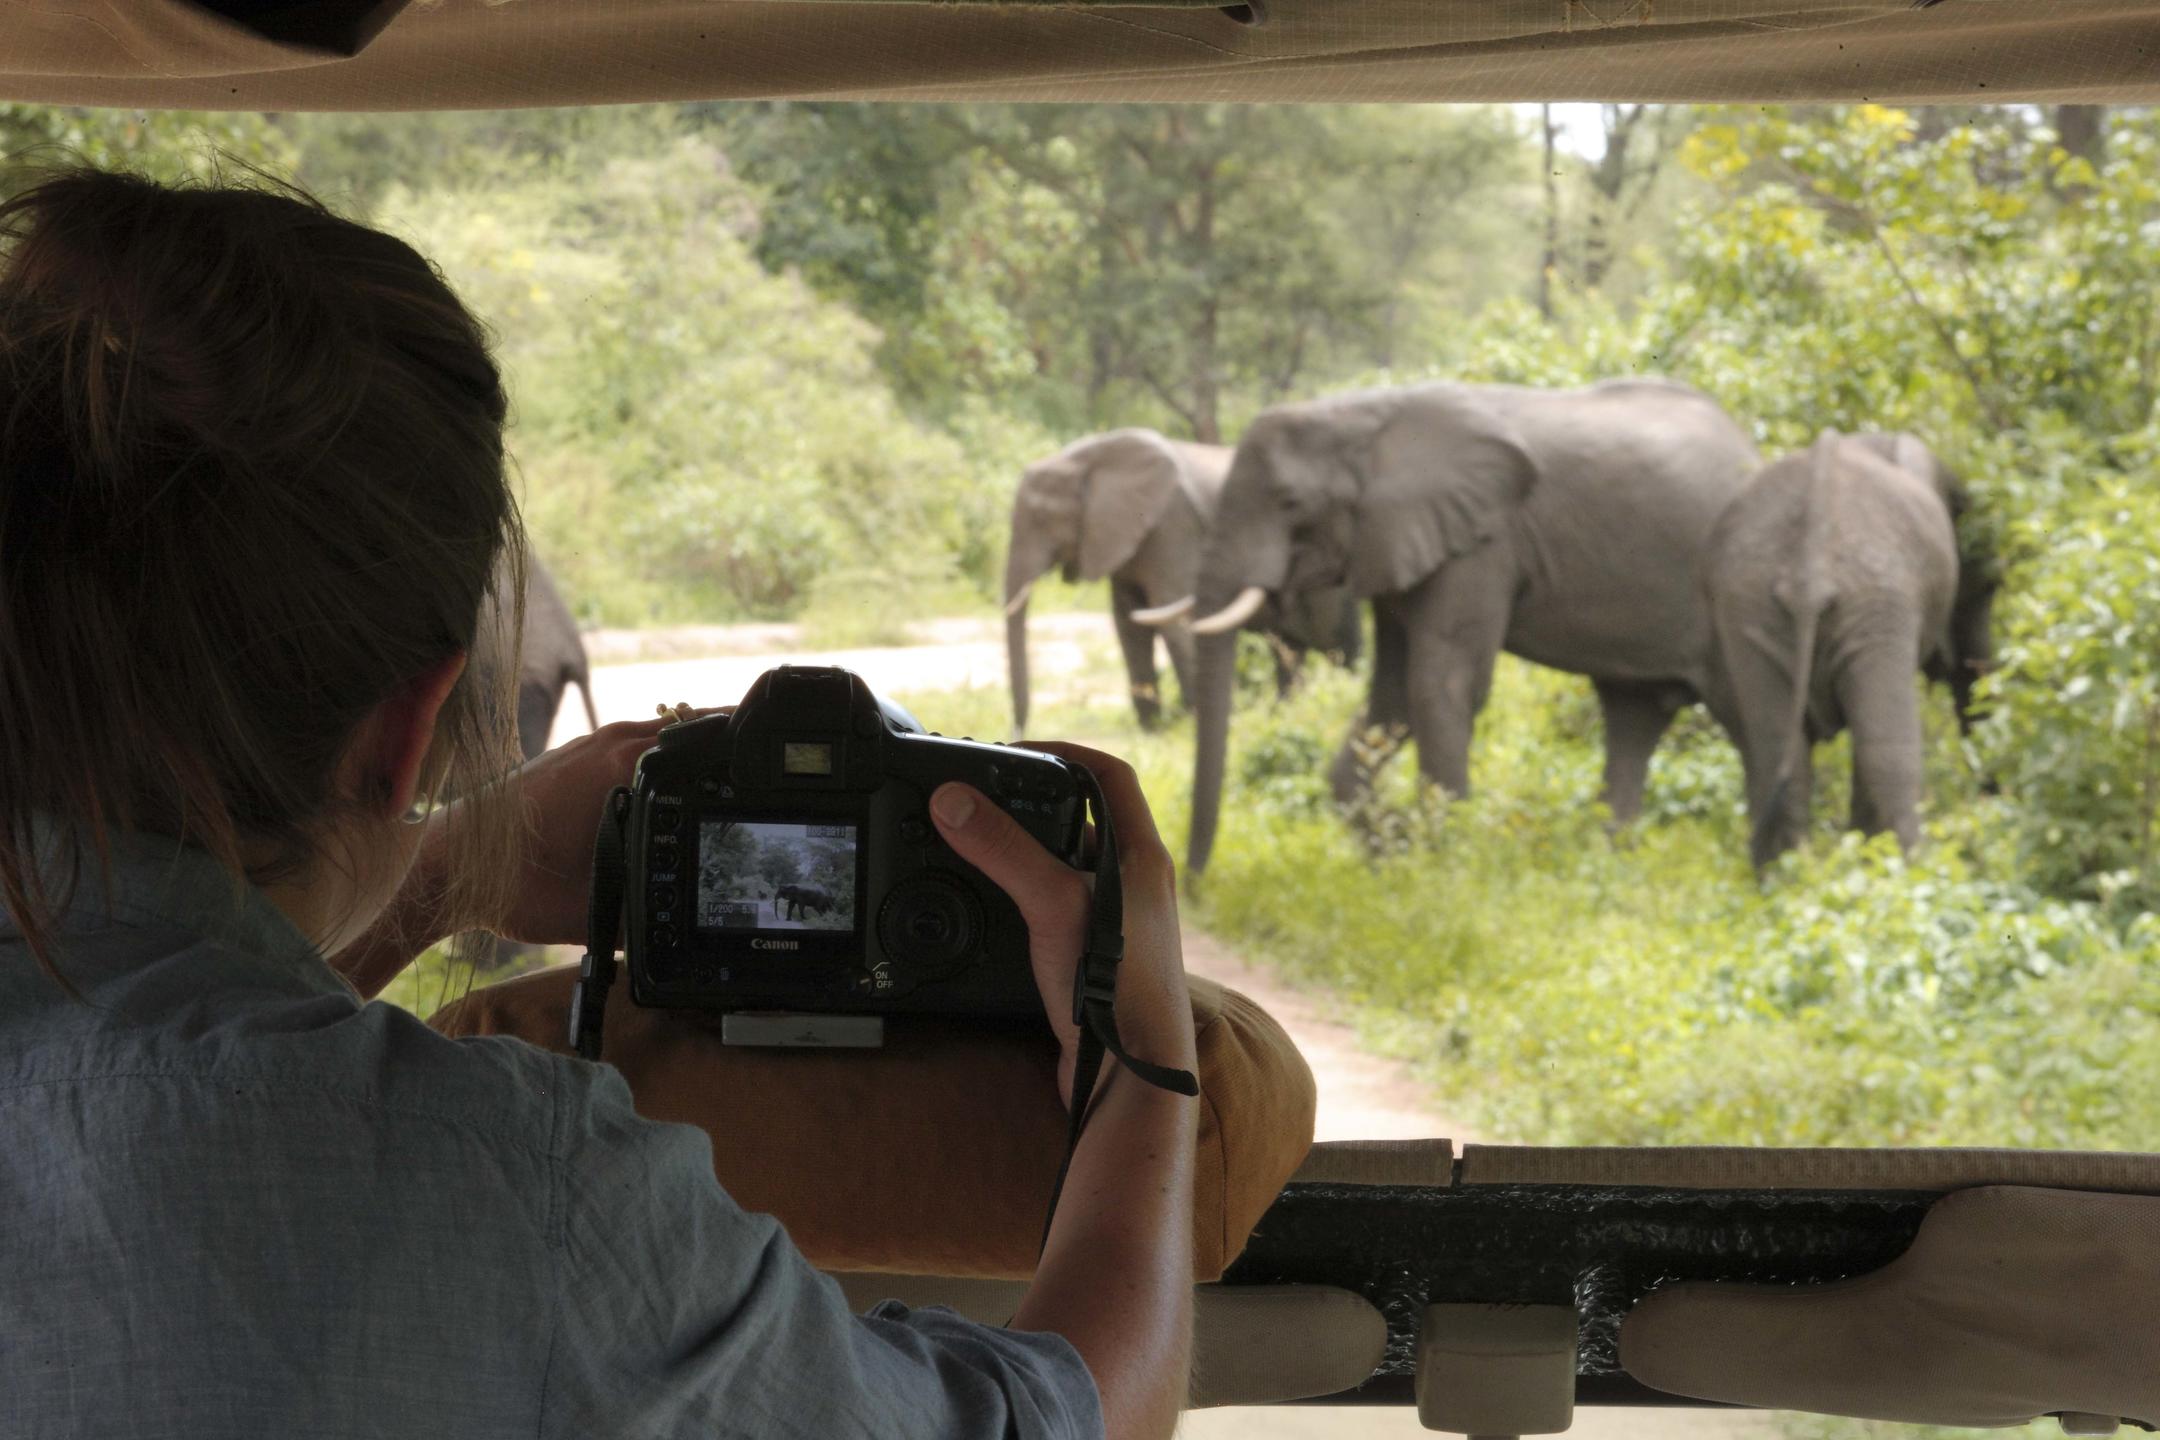 Viewing herd of elephants and taking pictures on a luxury safari in Tanzania.